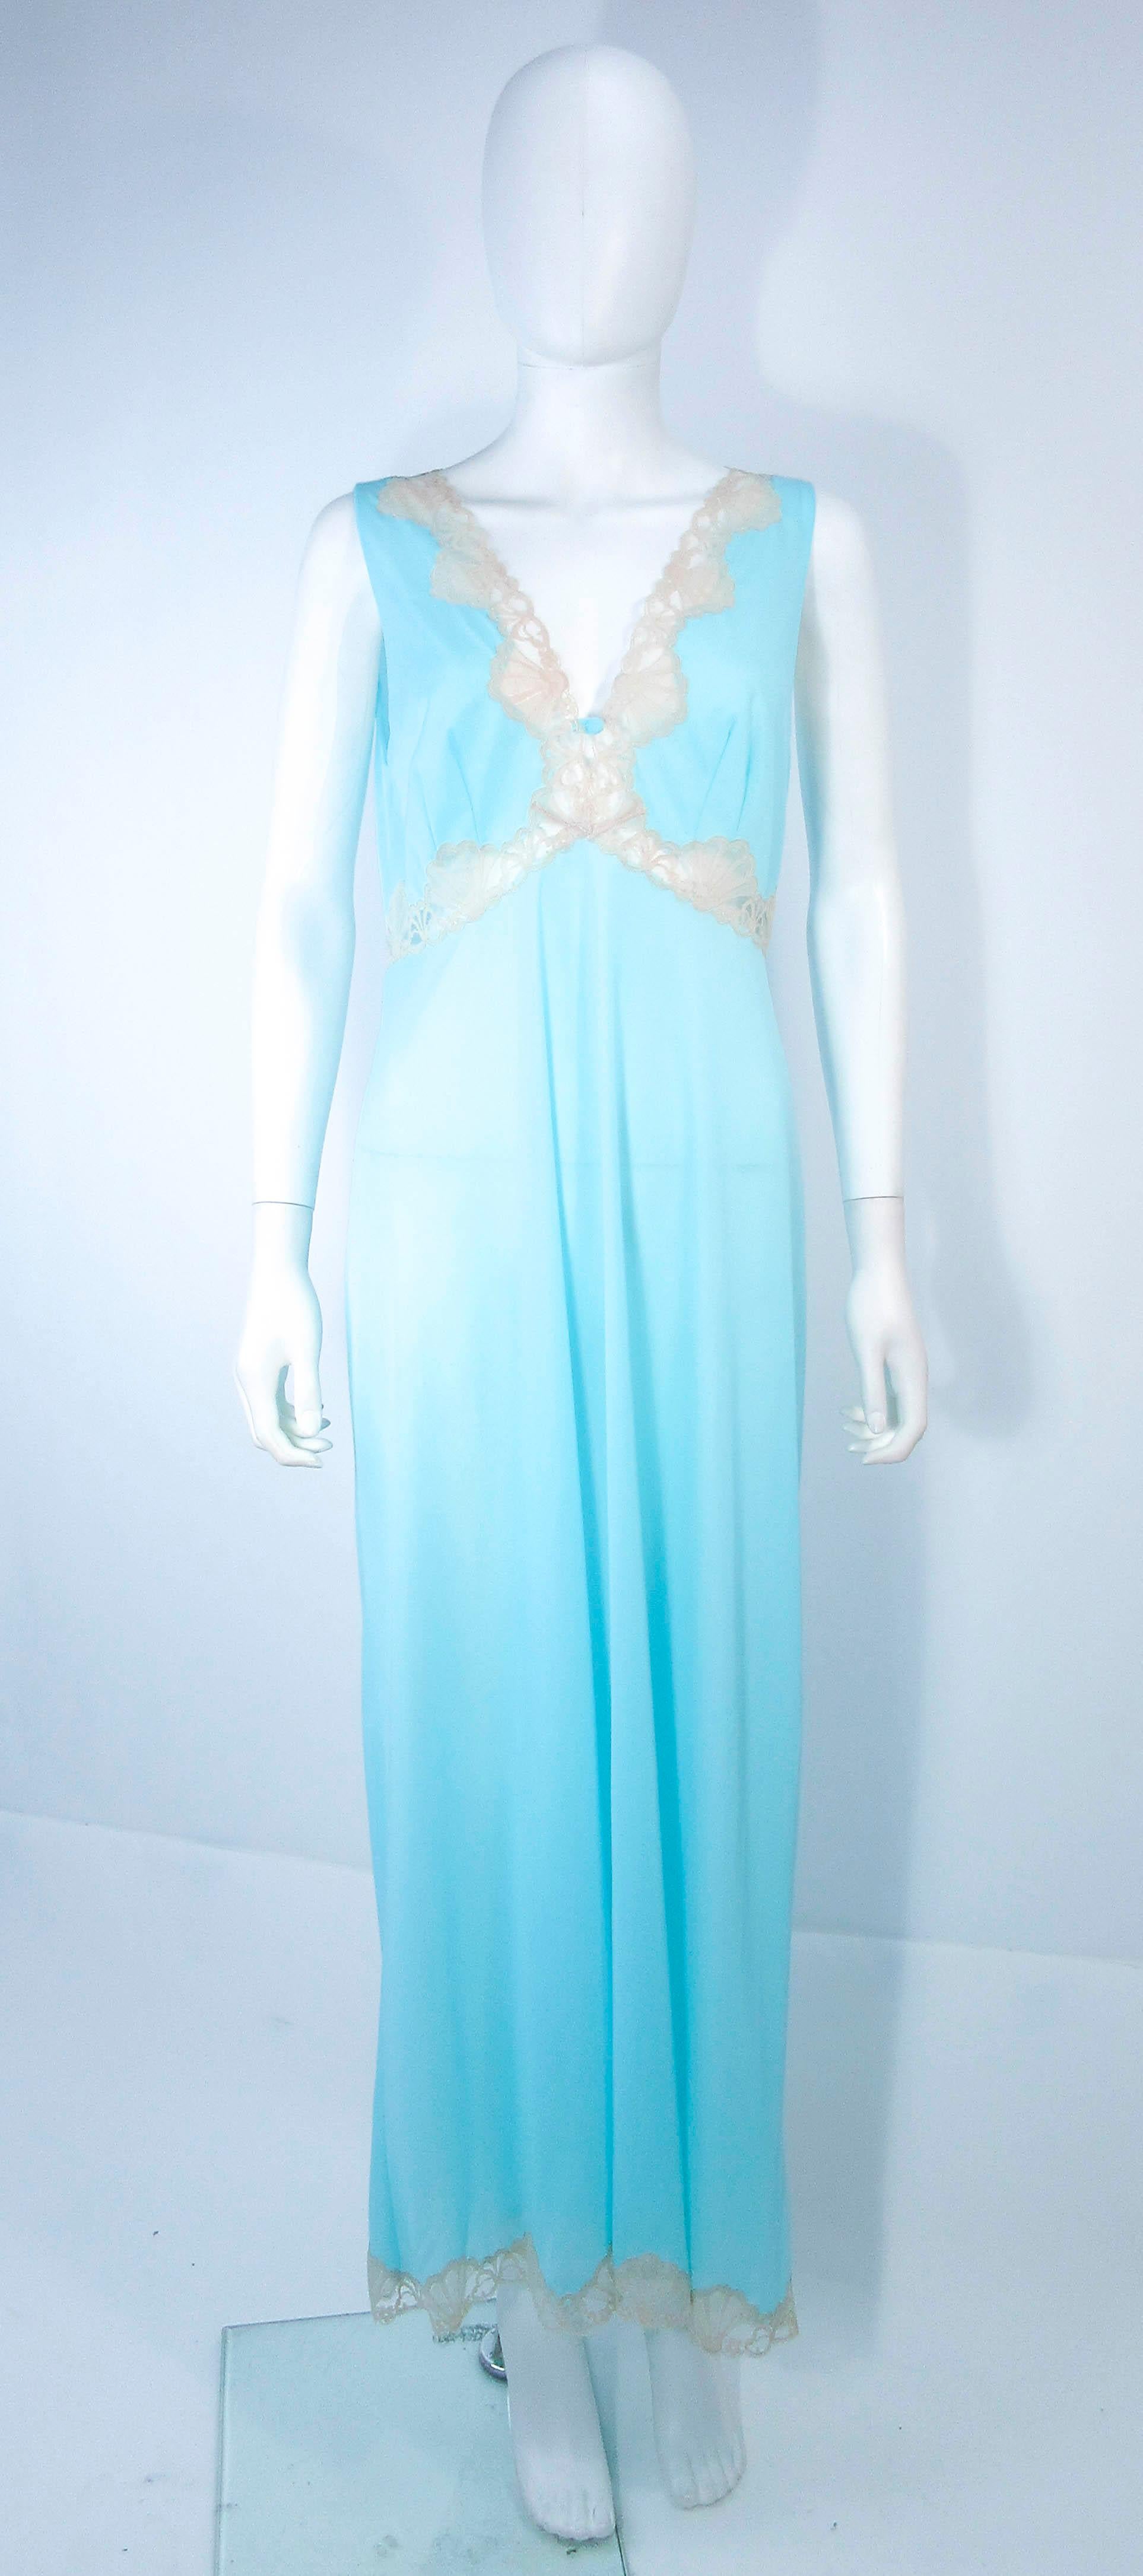 This Pucci dress is composed of a light blue poly nit with nude lace trim. Features an empire waist with a v-neck. In excellent vintage condition with original tags. 

**Please cross-reference measurements for personal accuracy. Size in description